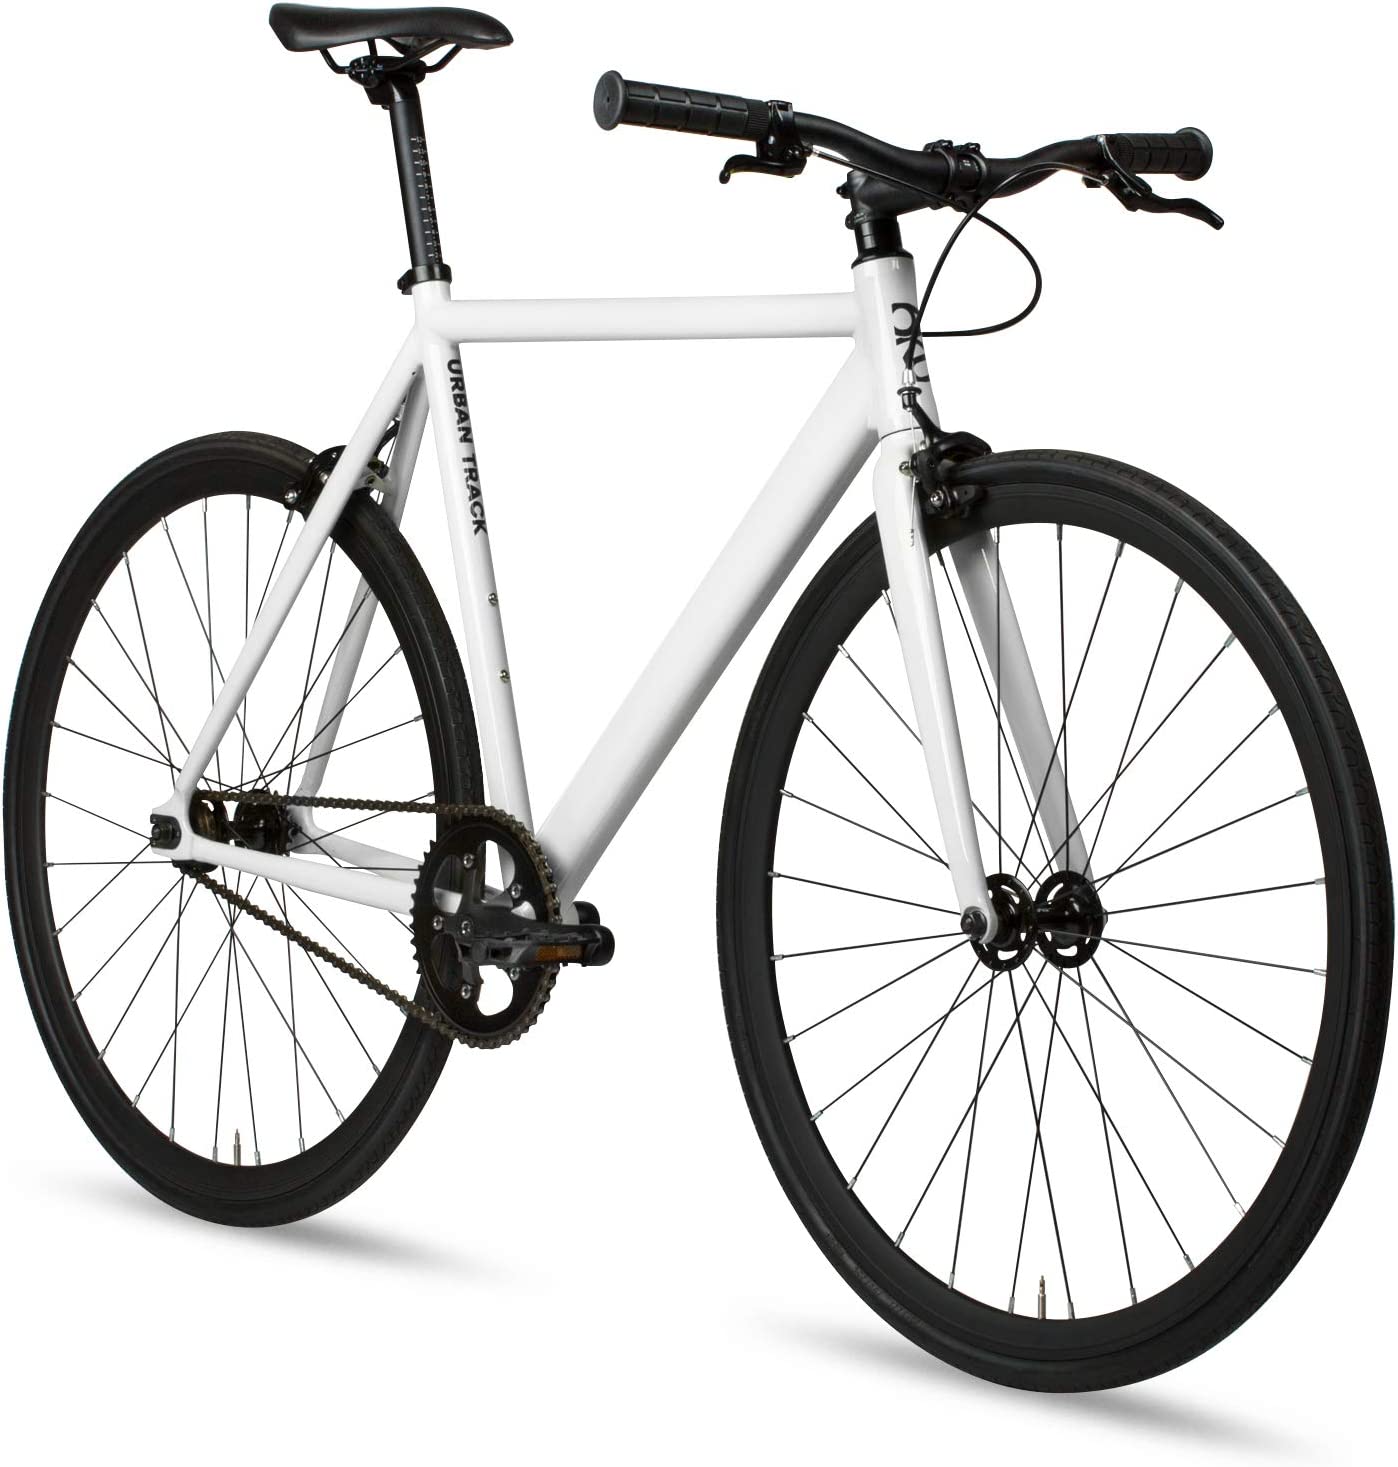 Which Bike is the Best for Long Drive Without Back Pain,